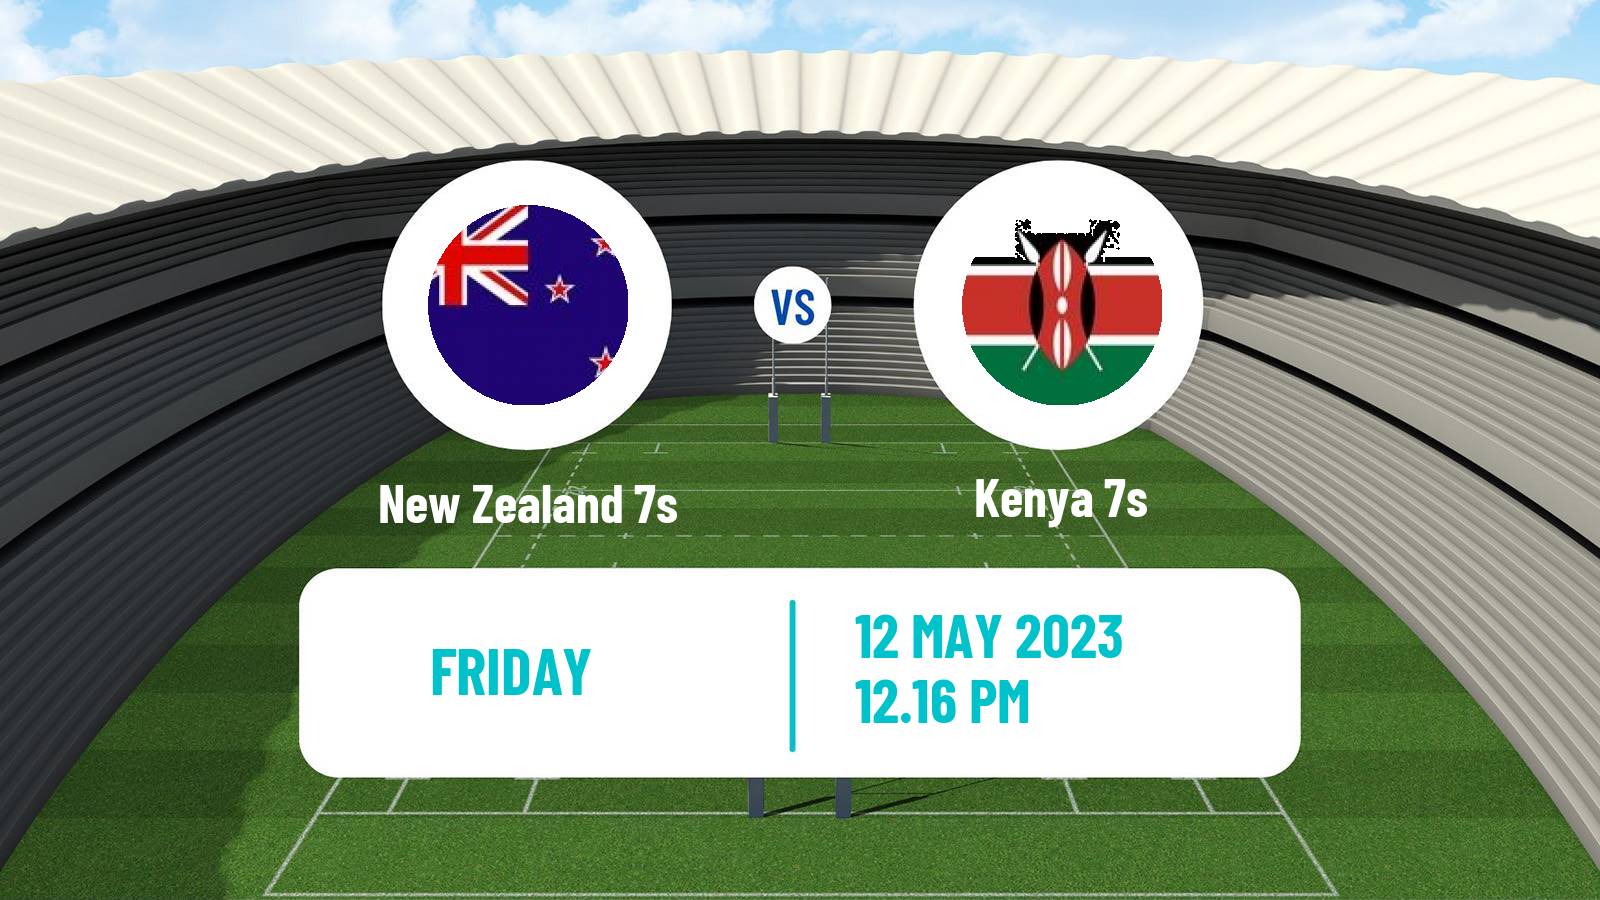 Rugby union Sevens World Series - France New Zealand 7s - Kenya 7s